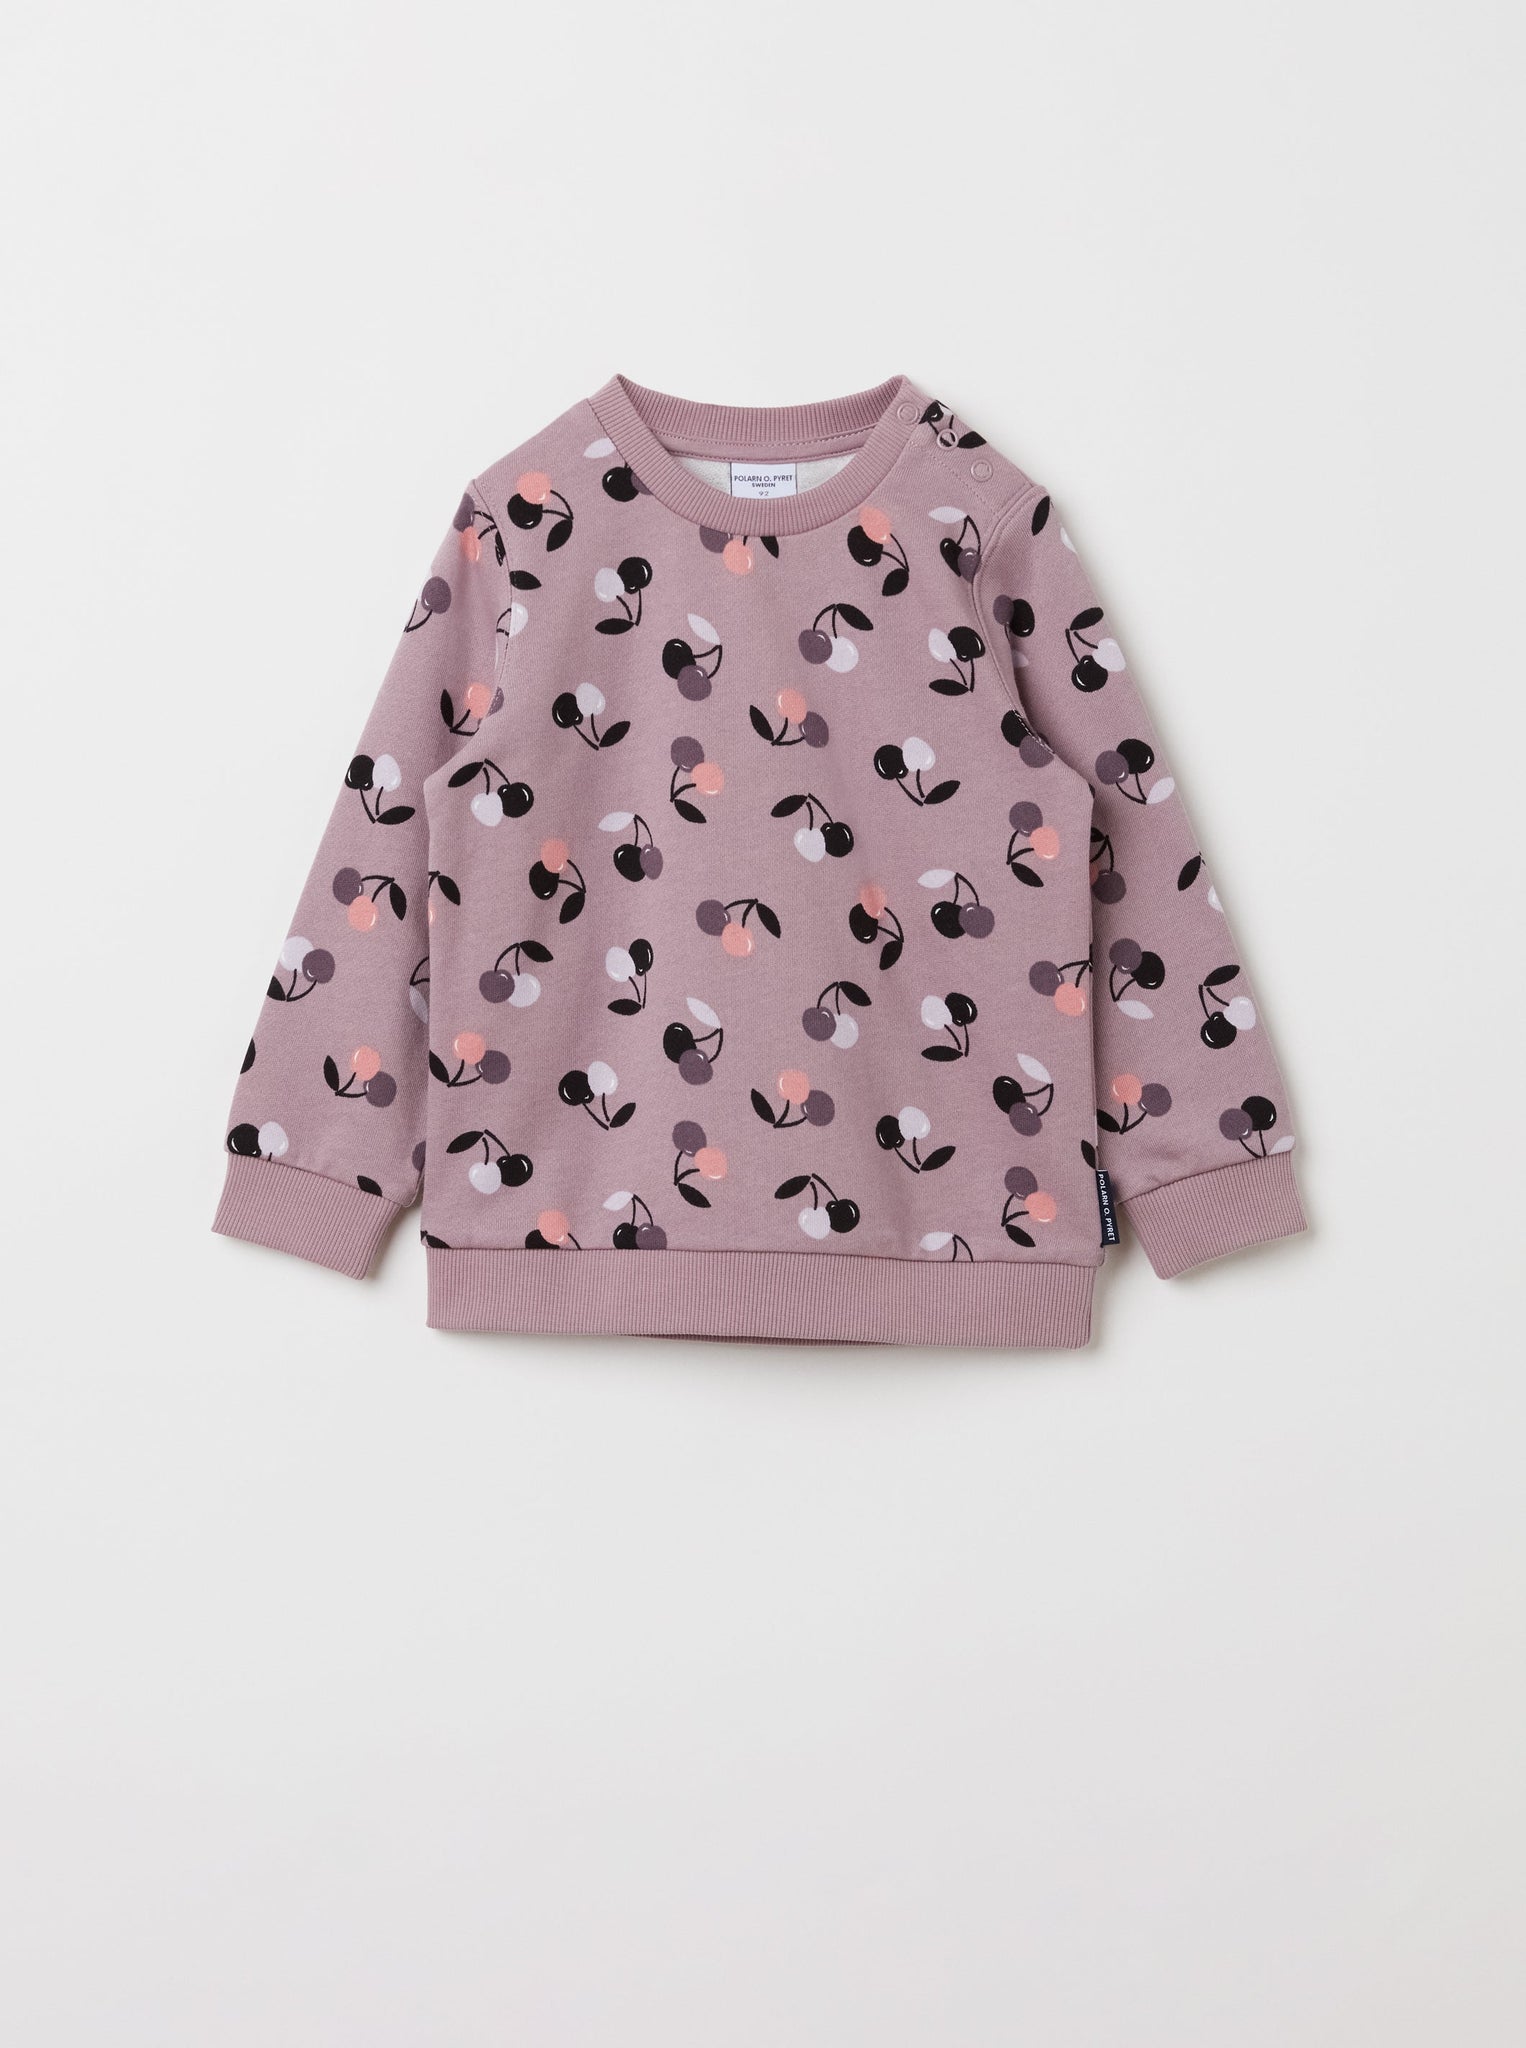 Cotton Pink Cherry Kids Sweatshirt from the Polarn O. Pyret kidswear collection. Ethically produced kids clothing.